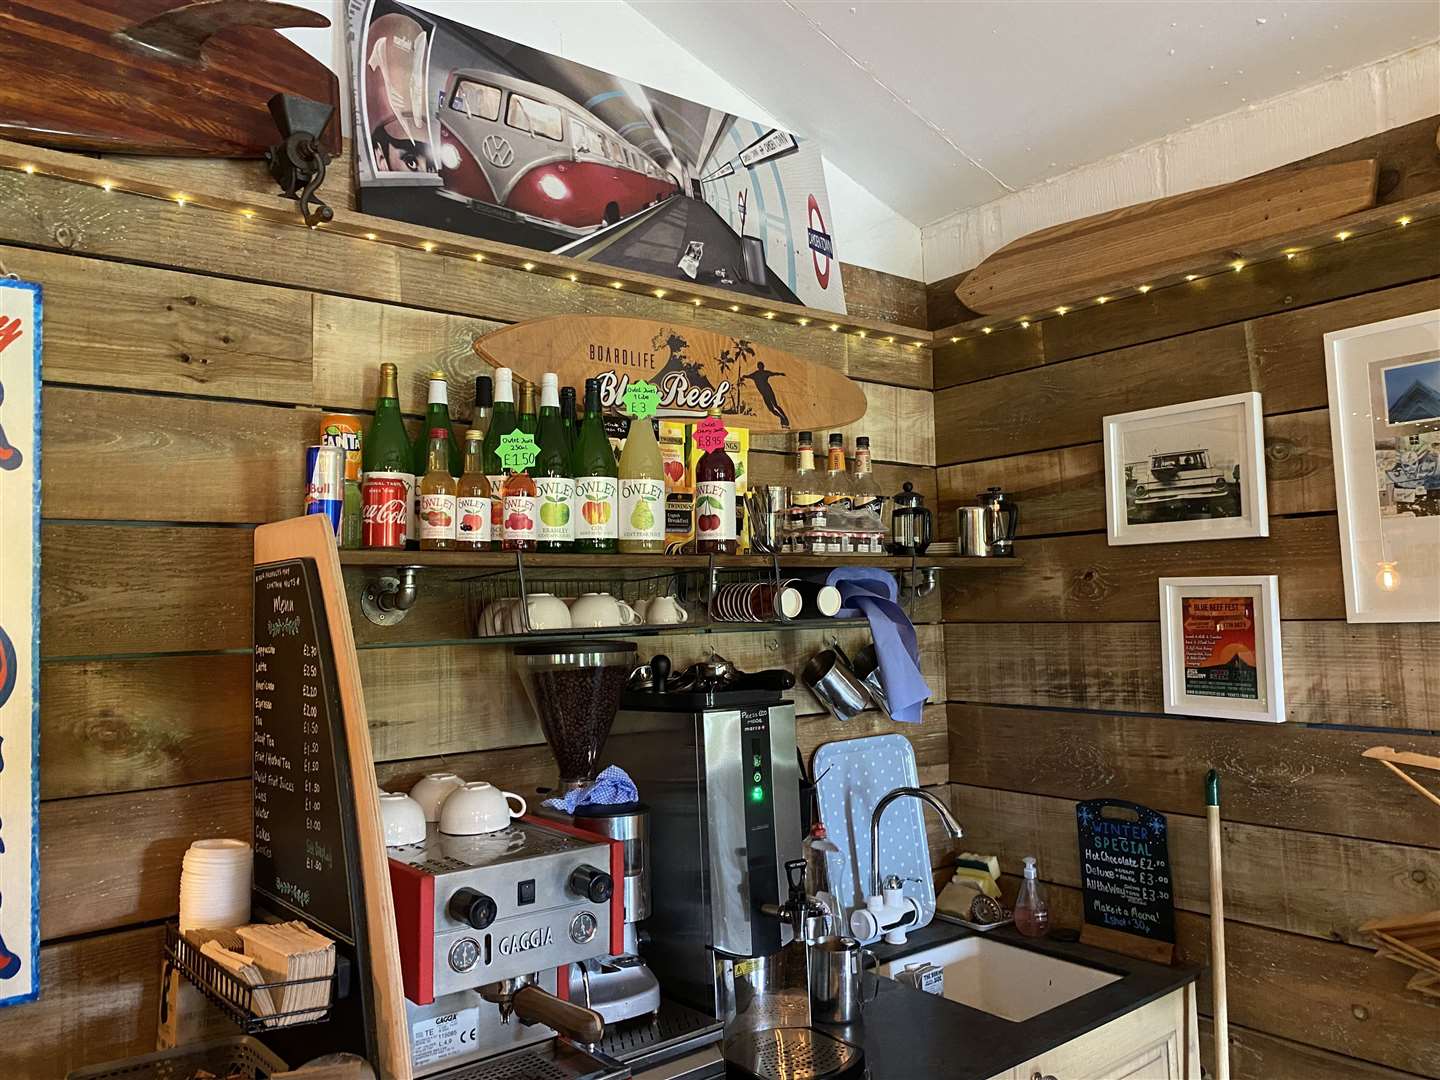 The Blue Reef skate shop also has a cafe where passionate enthusiasts can meet